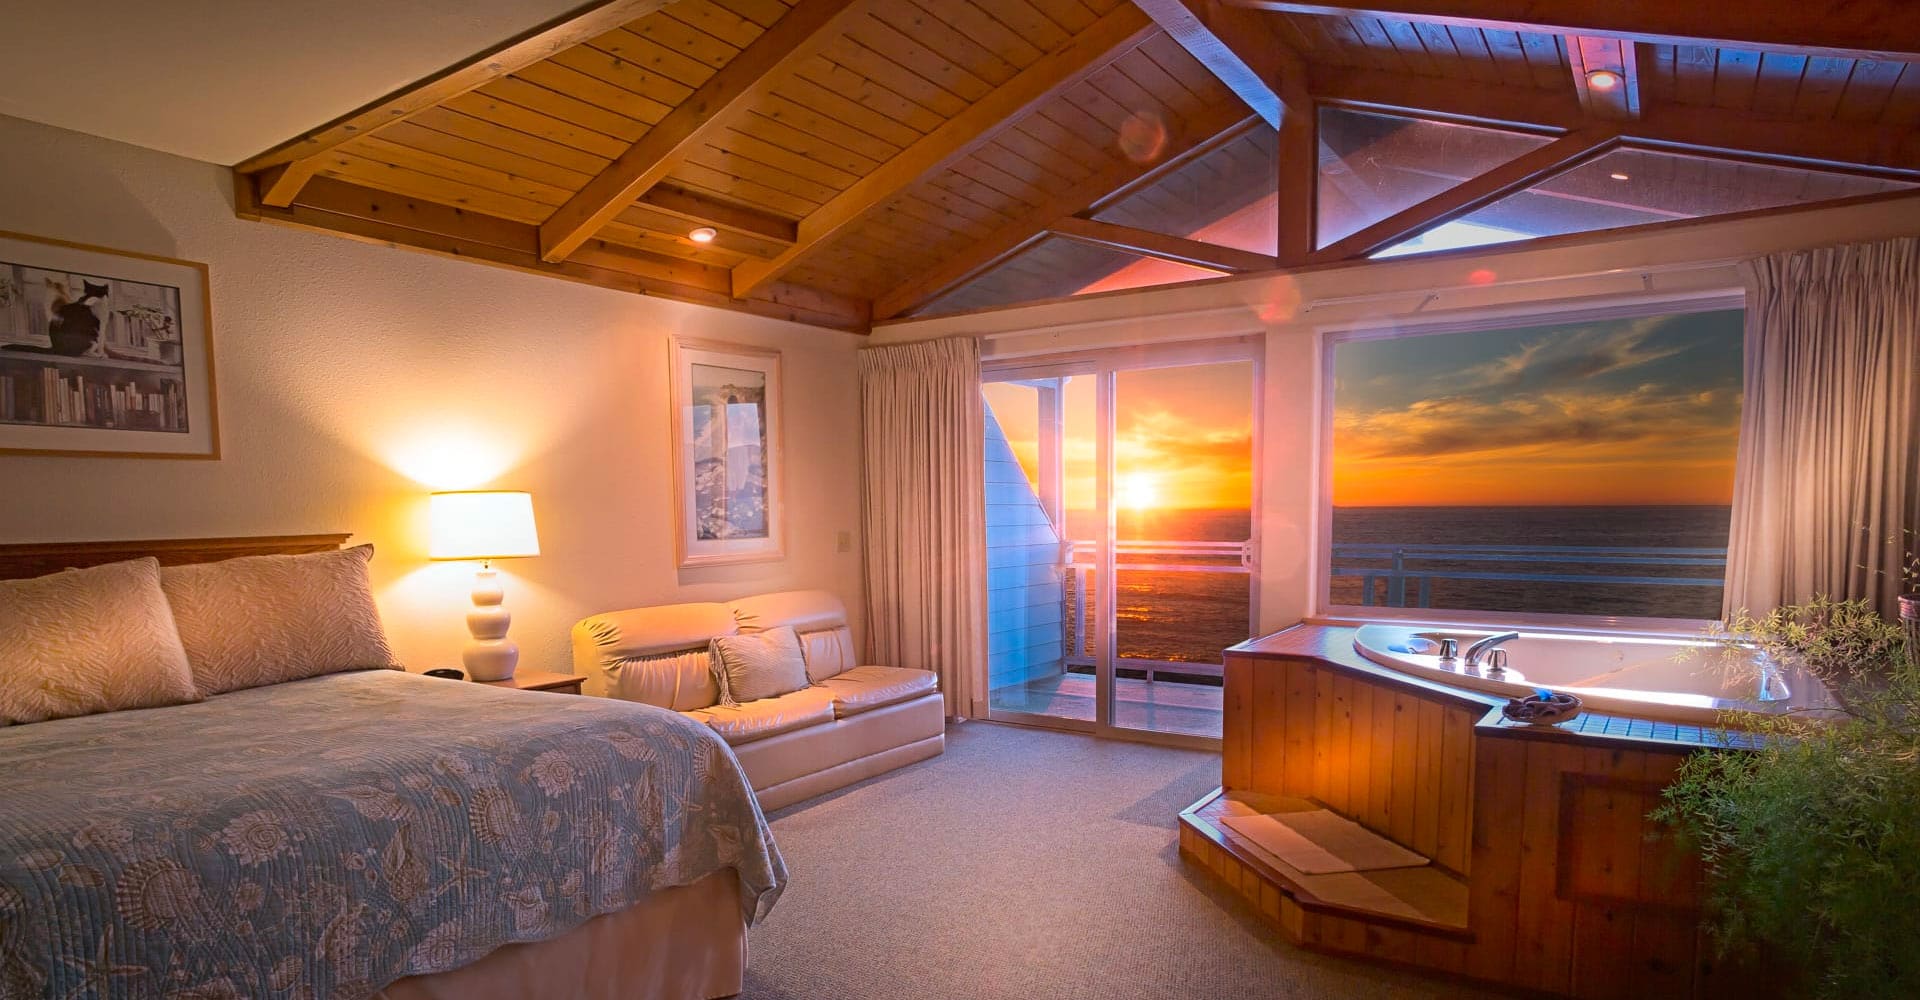 Deluxe Spa Suite - Inn of the Lost Coast